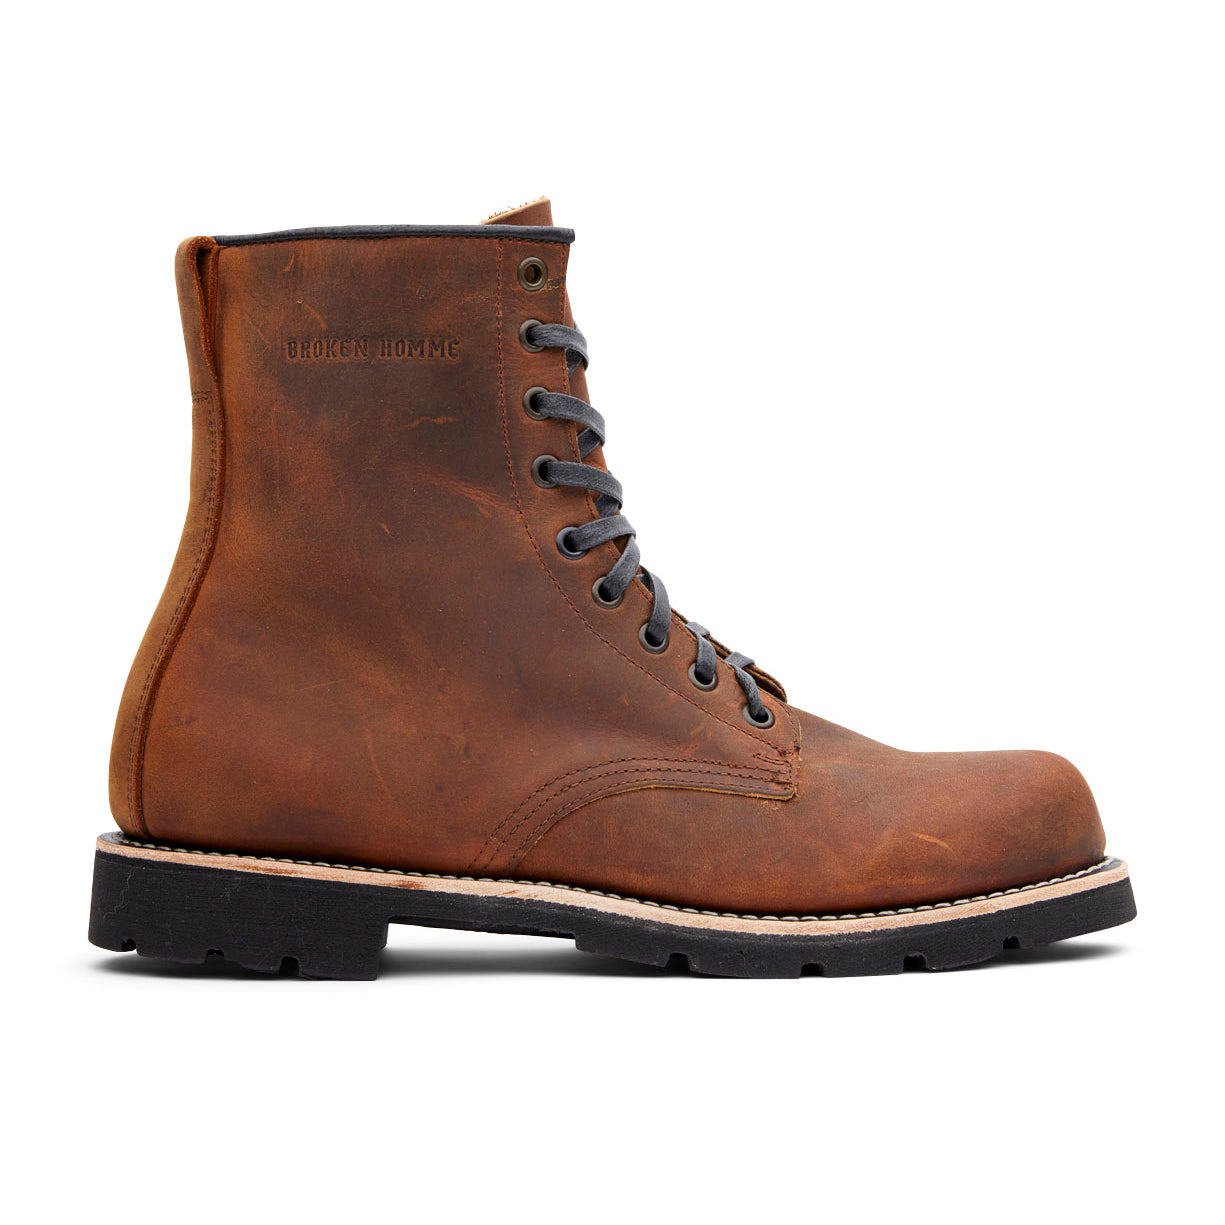 The Jacob men's brown leather boot, made with 360 full grain leather welt, is shown on a white background. (Broken Homme)